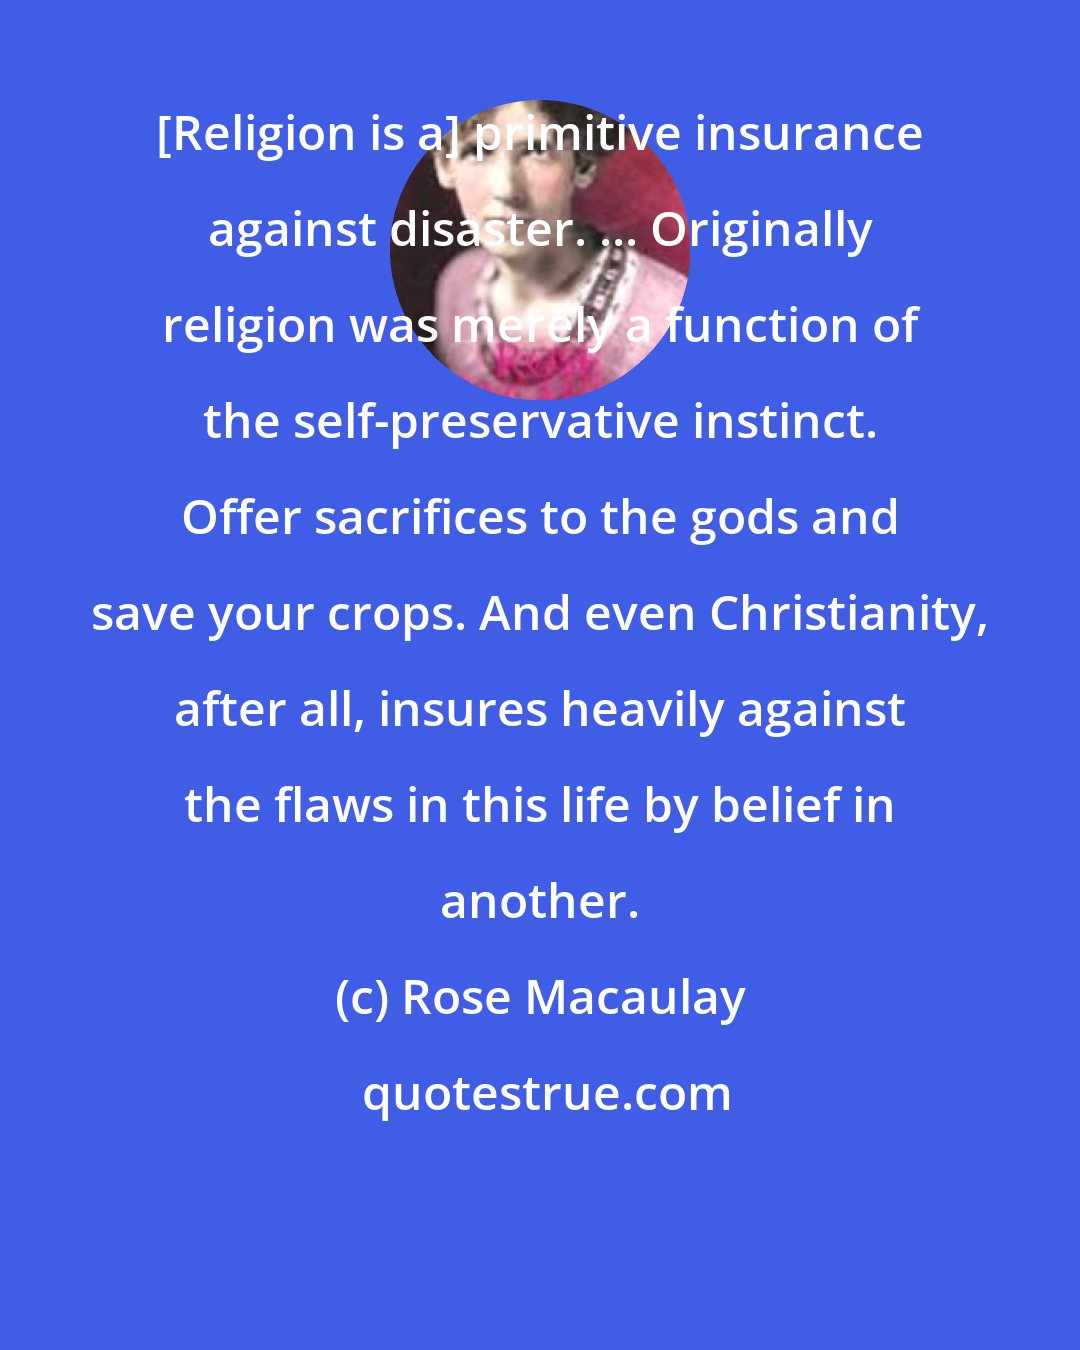 Rose Macaulay: [Religion is a] primitive insurance against disaster. ... Originally religion was merely a function of the self-preservative instinct. Offer sacrifices to the gods and save your crops. And even Christianity, after all, insures heavily against the flaws in this life by belief in another.